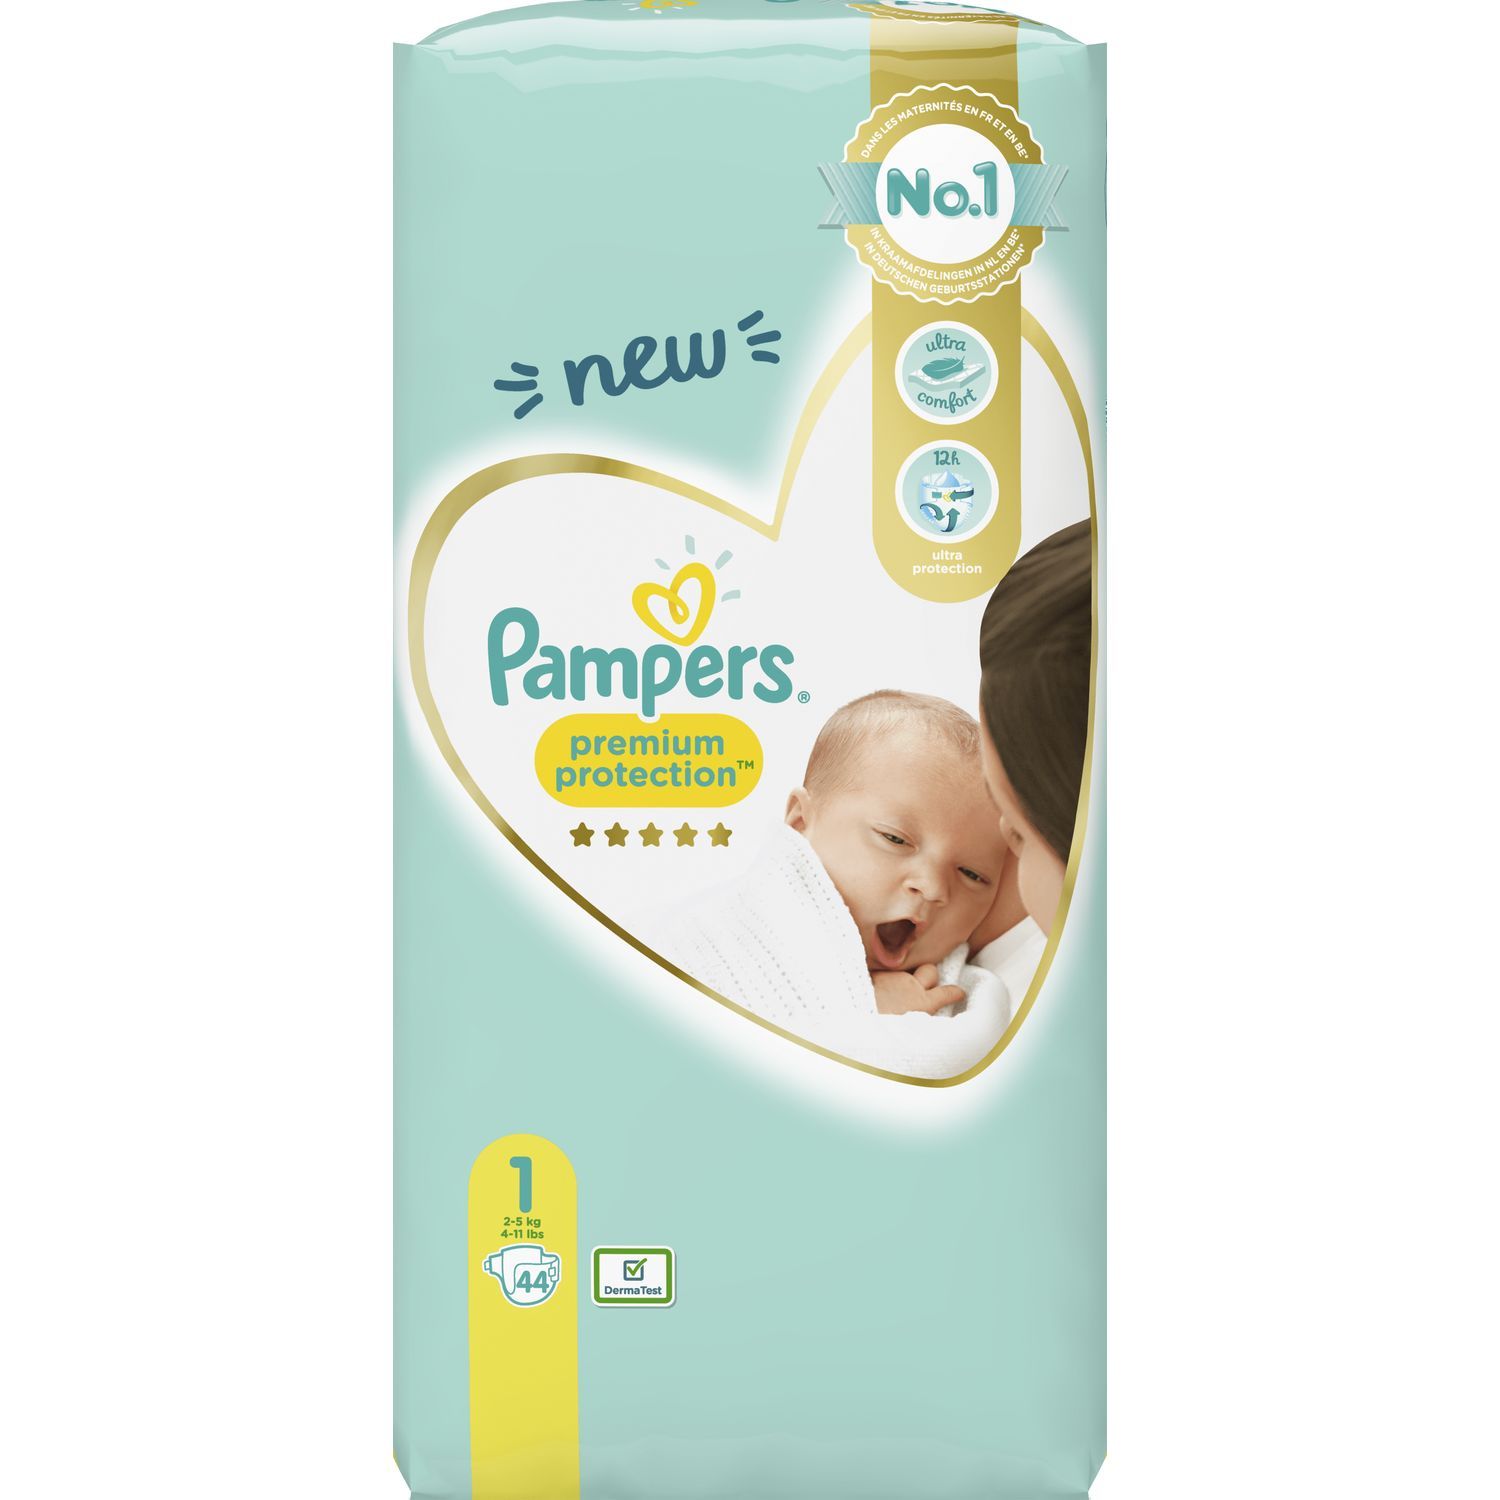 COUCHES PREMIUM NEW BABY TAILLE 1 (2-5 KG)